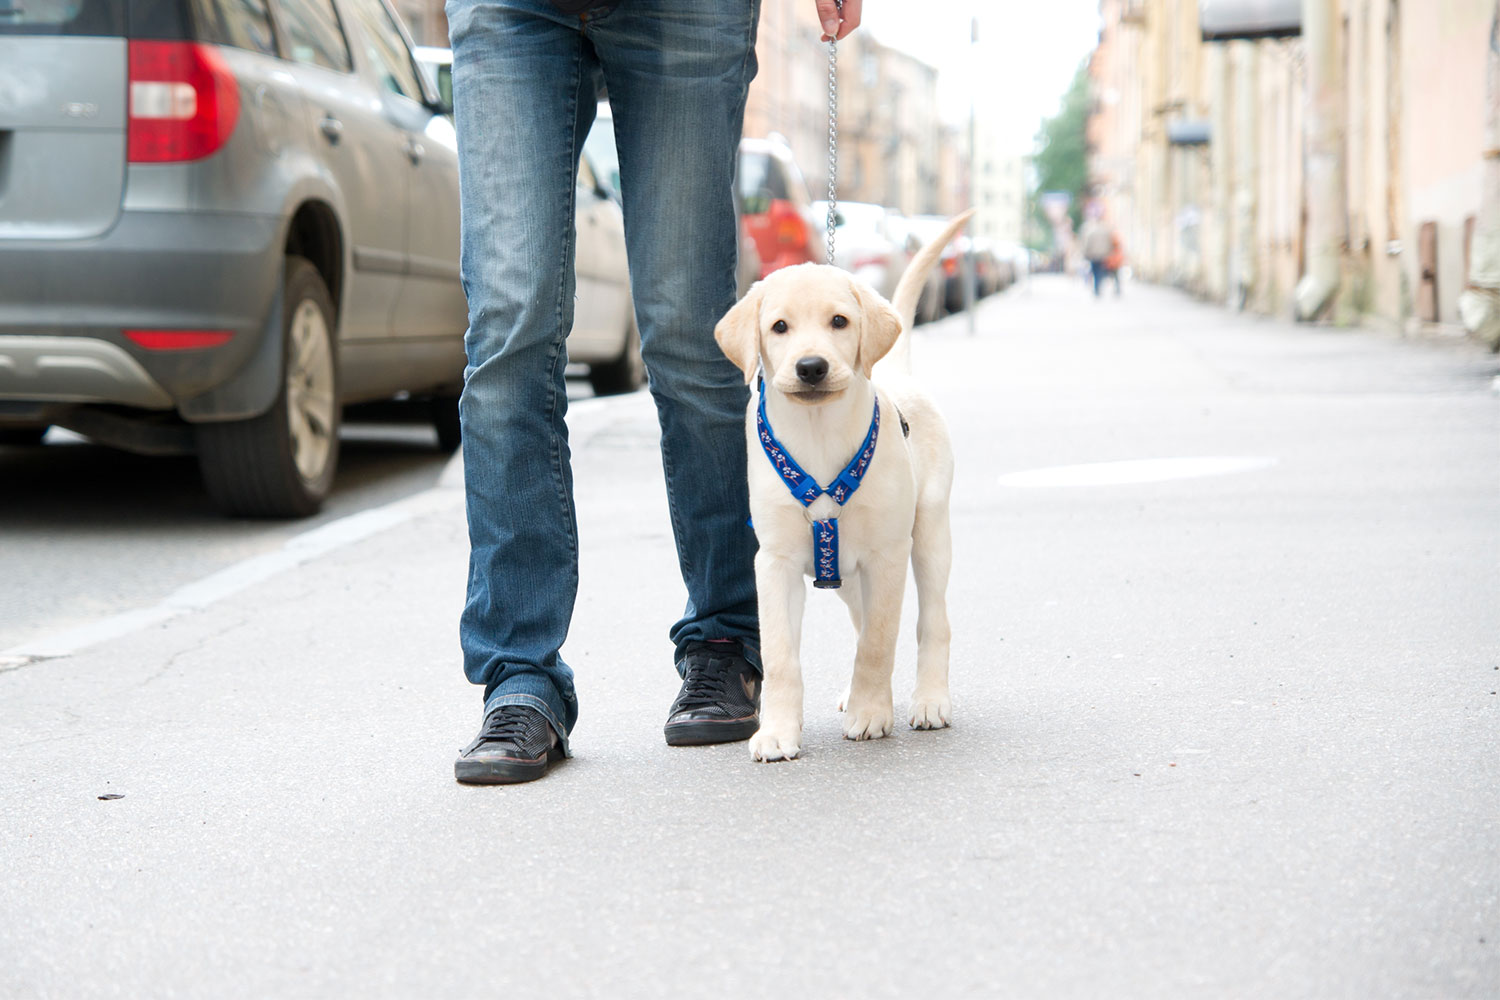 How To Find The Best Puppy Harness